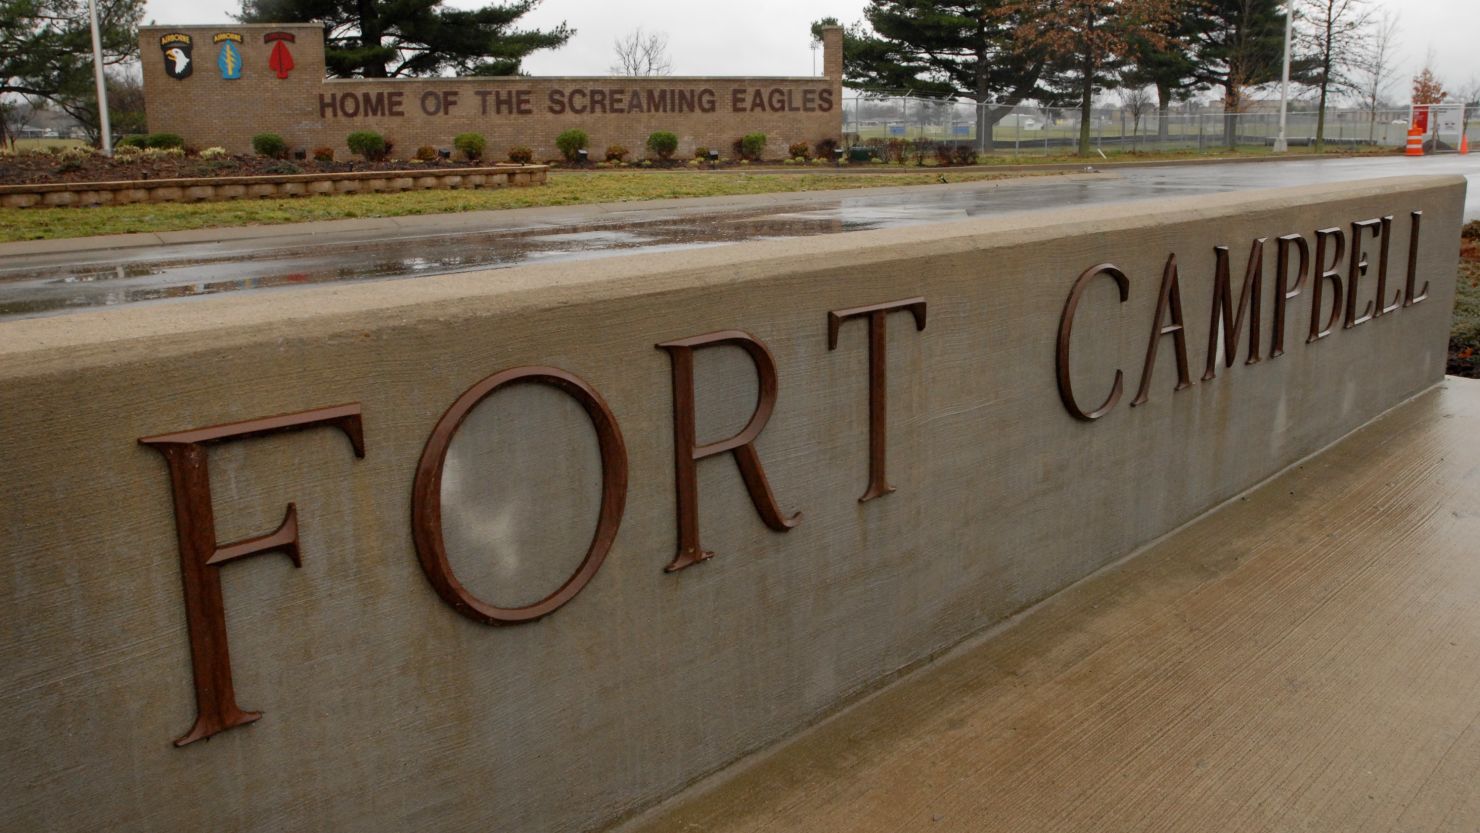 Fort Campbell is home to the Army's fifth largest military population.